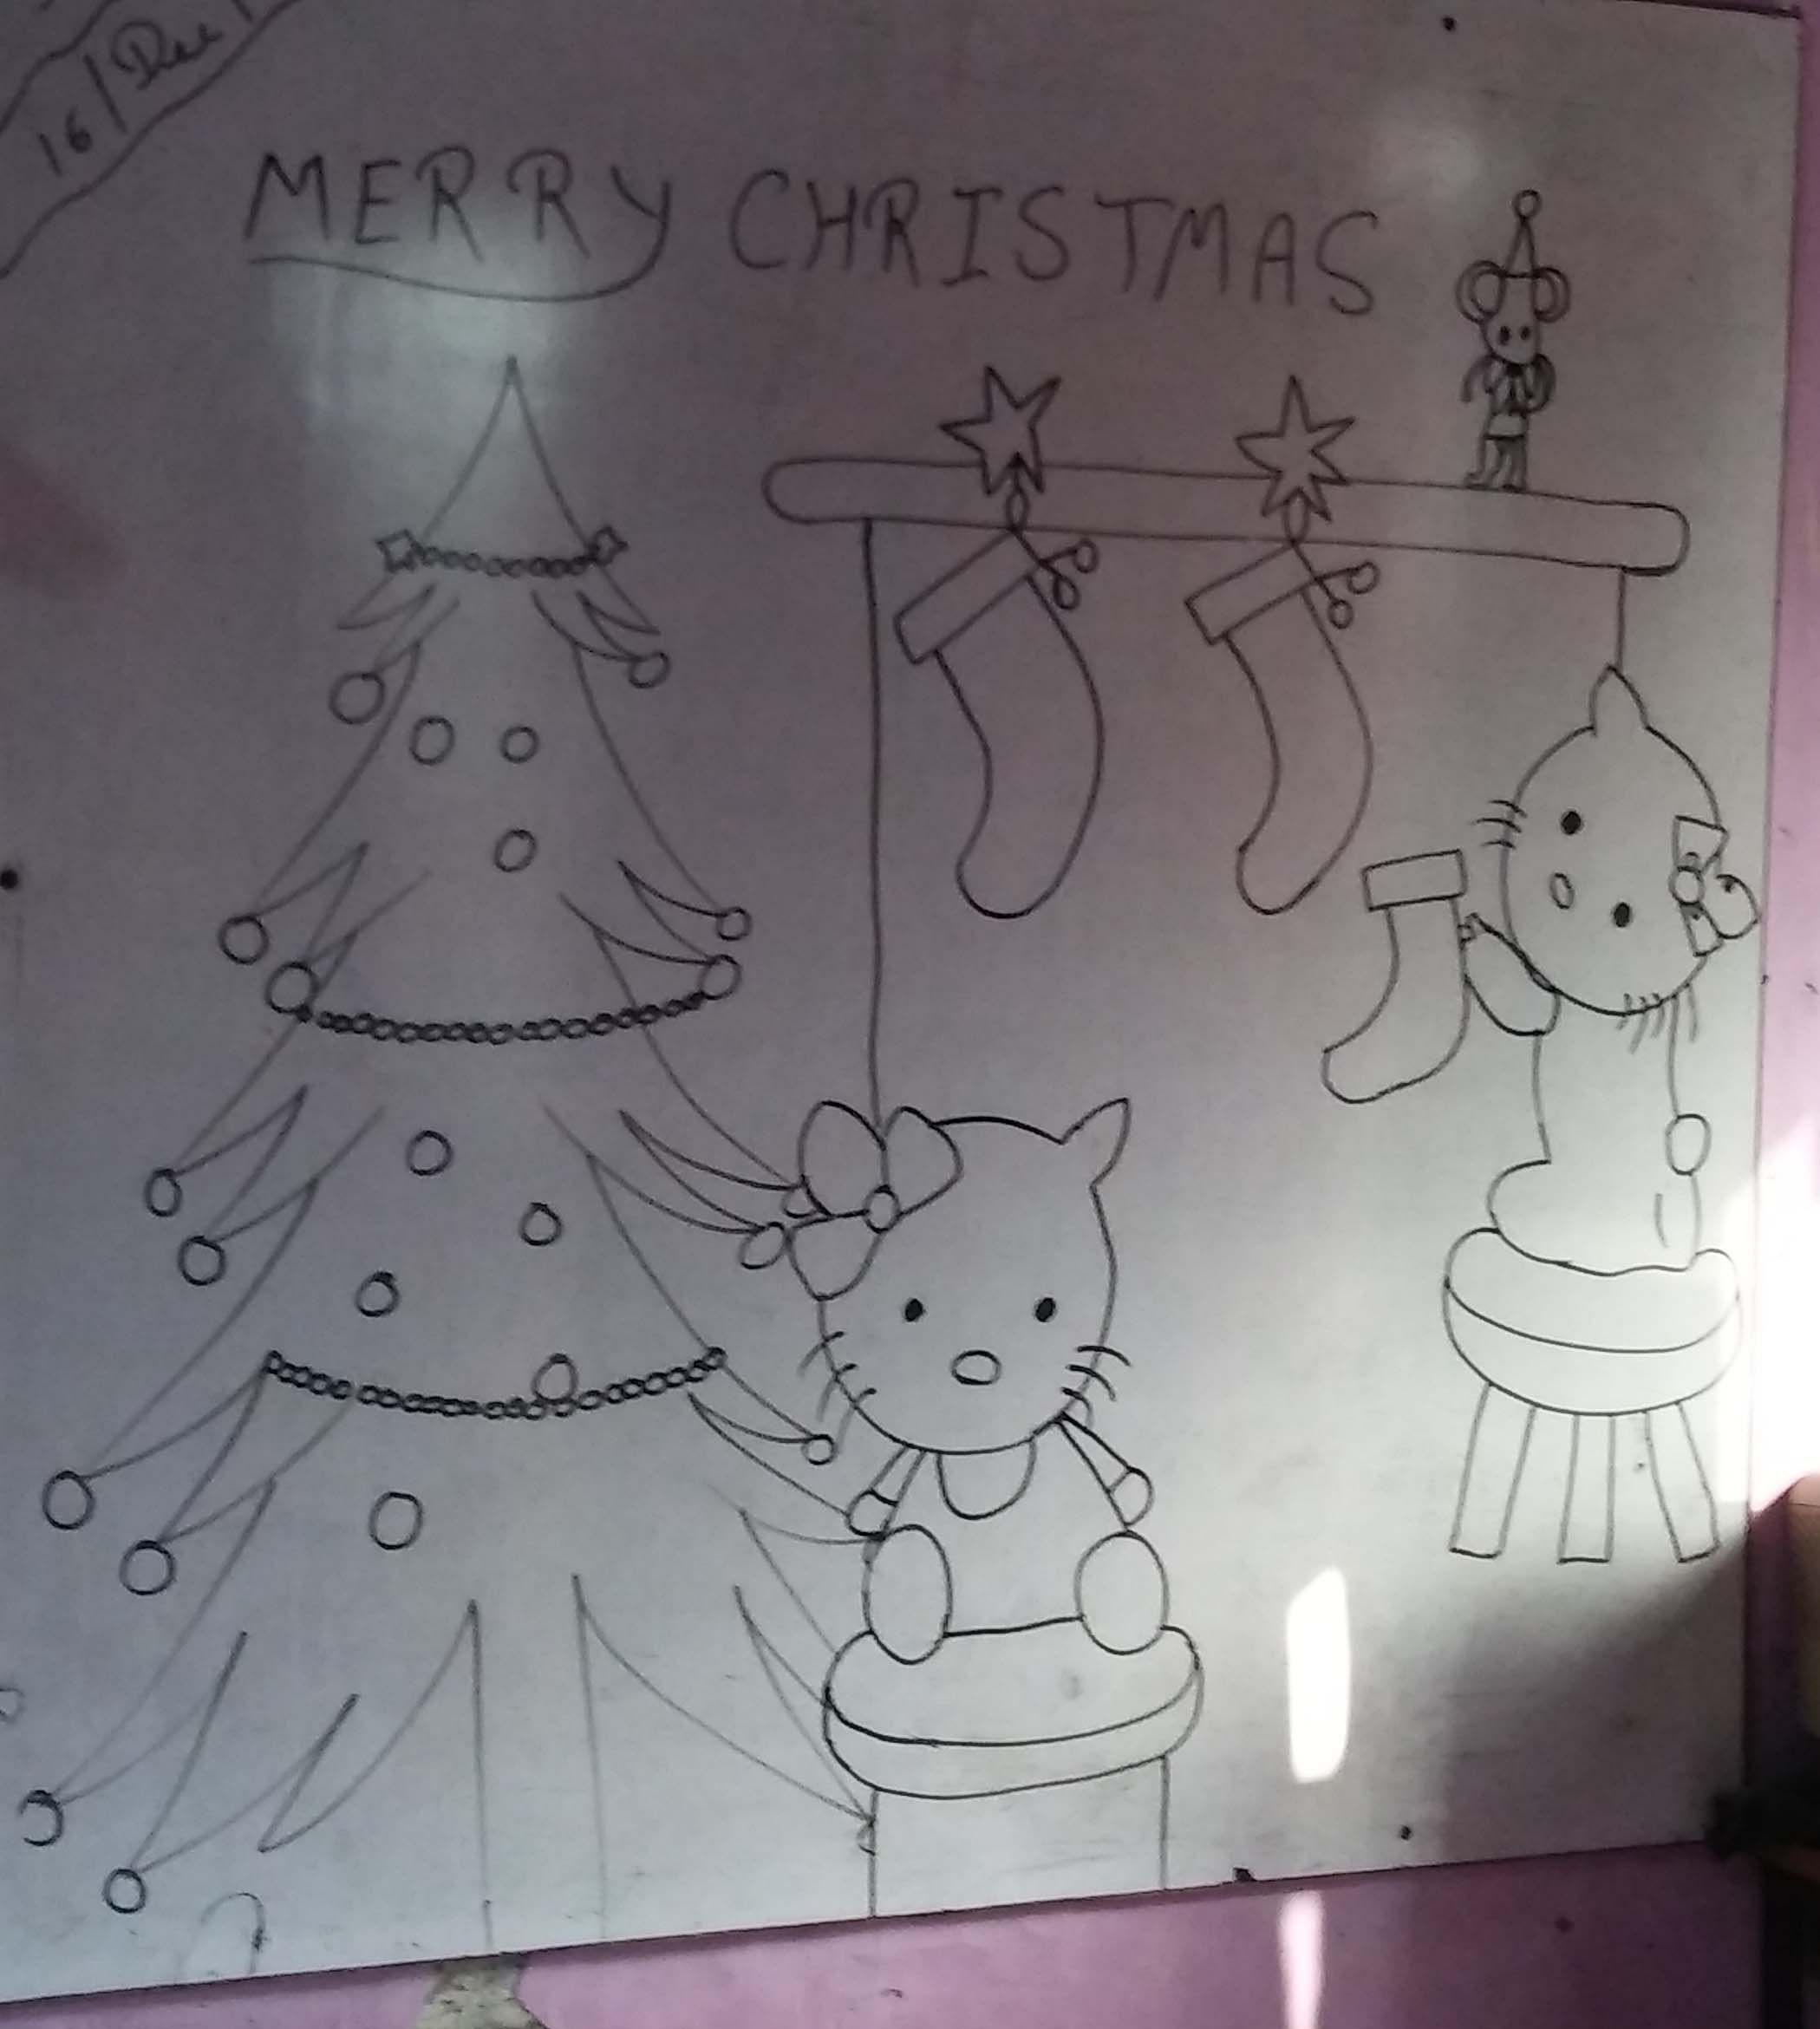 HOW TO DRAW MERRY CHRISTMAS/SANTA CLAUS STEP BY STEP/XMAS TREE DRAWING EASY  STEPS/ CHRISTMAS DRAWING | Christmas drawing, Tree drawing, Santa claus  drawing